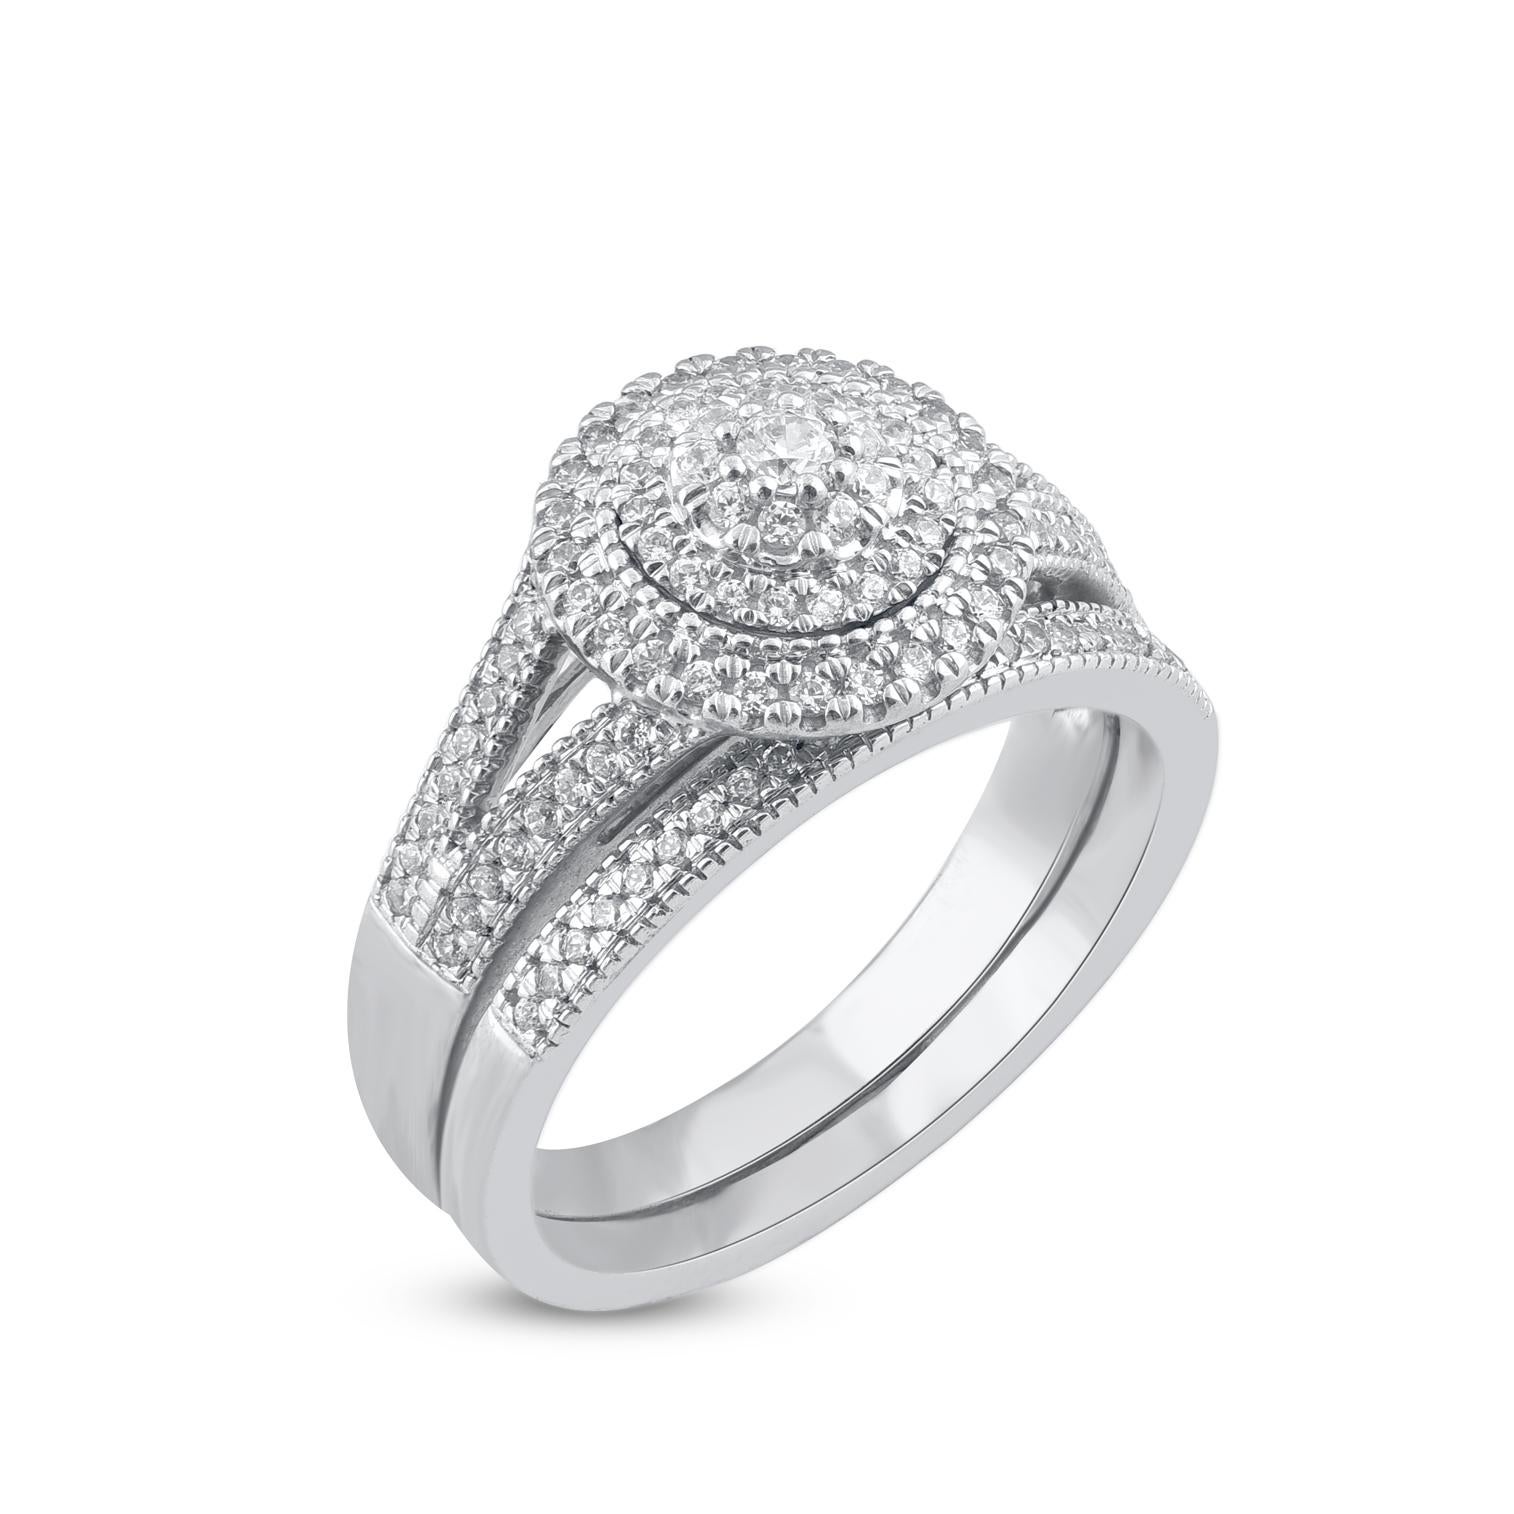 Express your love for her in the most classic way with this diamond ring set. Crafted in 14 Karat white gold. This wedding ring features a sparkling 109 brilliant cut and single cut round diamond beautifully set in prong & pave setting. The total